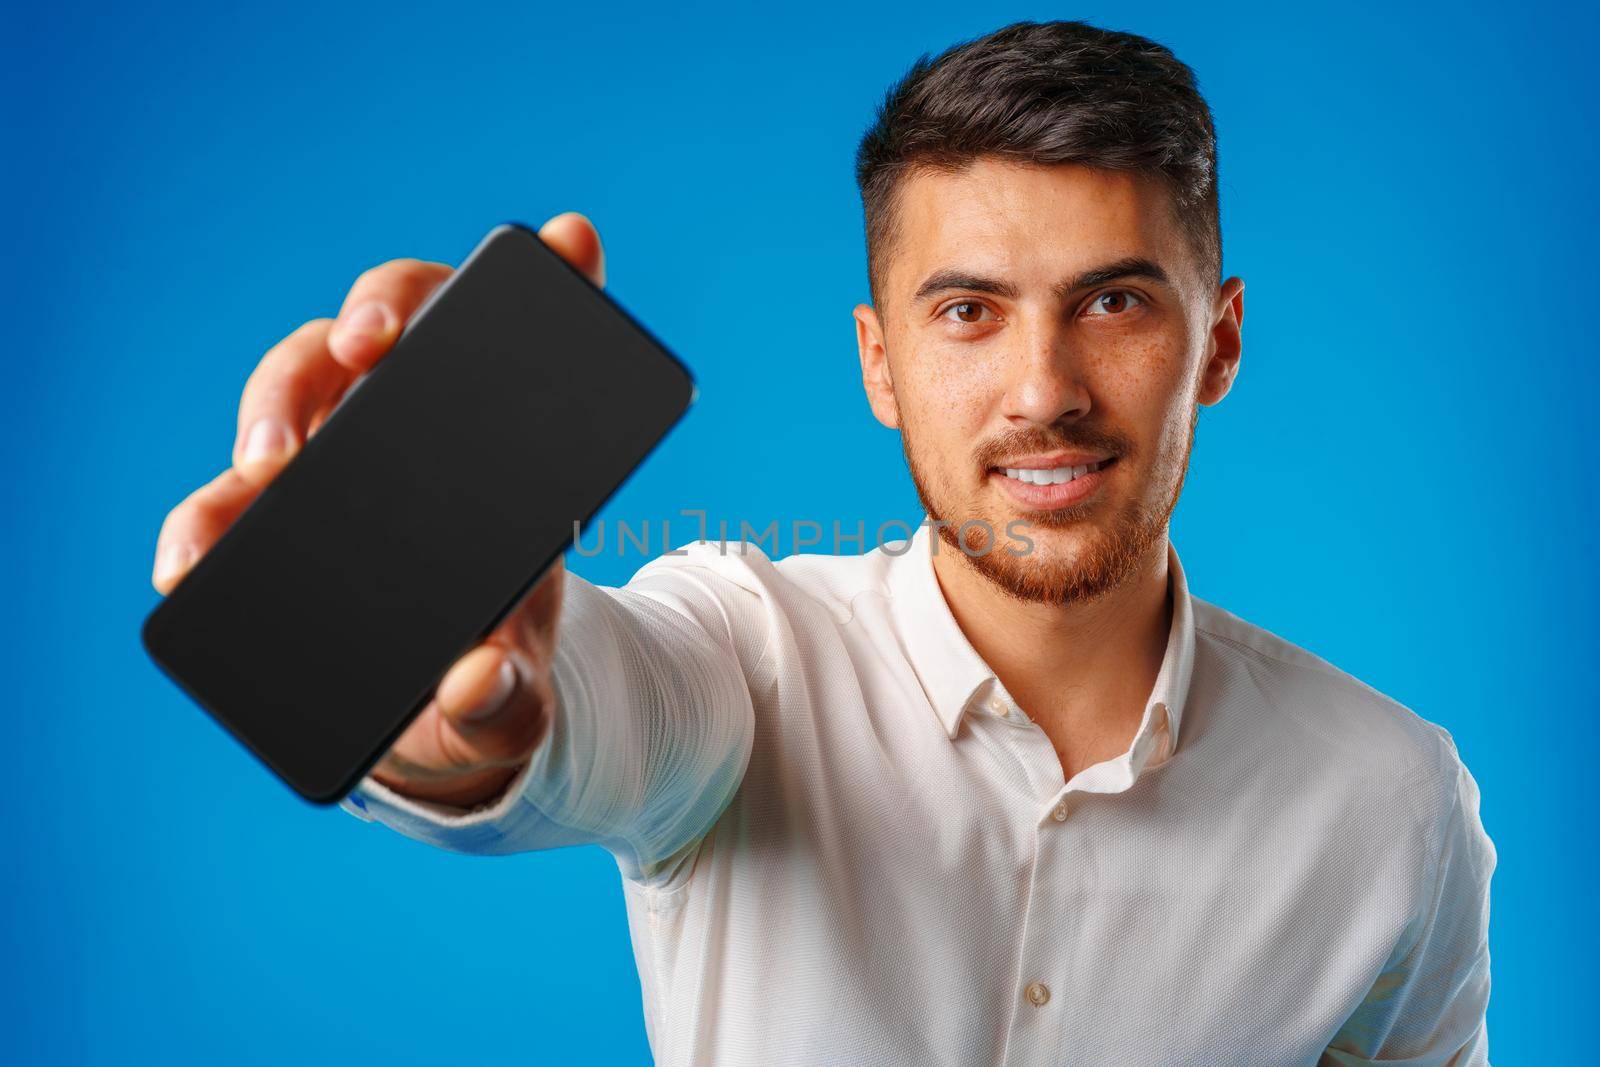 Young handsome businessman showing black smartphone screen against blue background close up